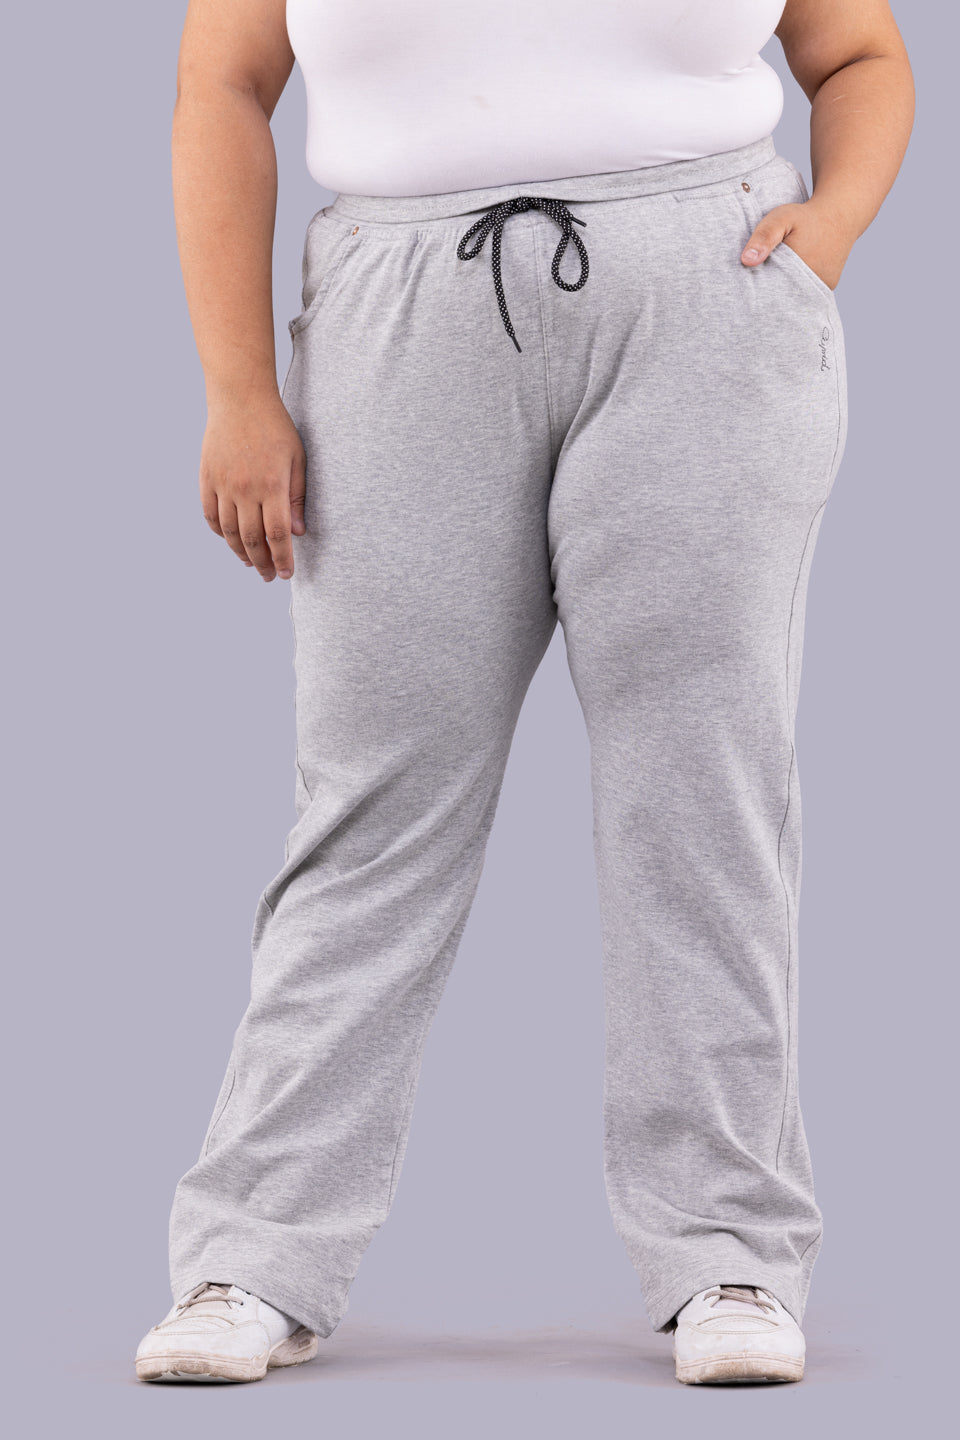 PUMA SWxP Sweatpants Solid Women Pink Track Pants - Buy PUMA SWxP Sweatpants  Solid Women Pink Track Pants Online at Best Prices in India | Flipkart.com